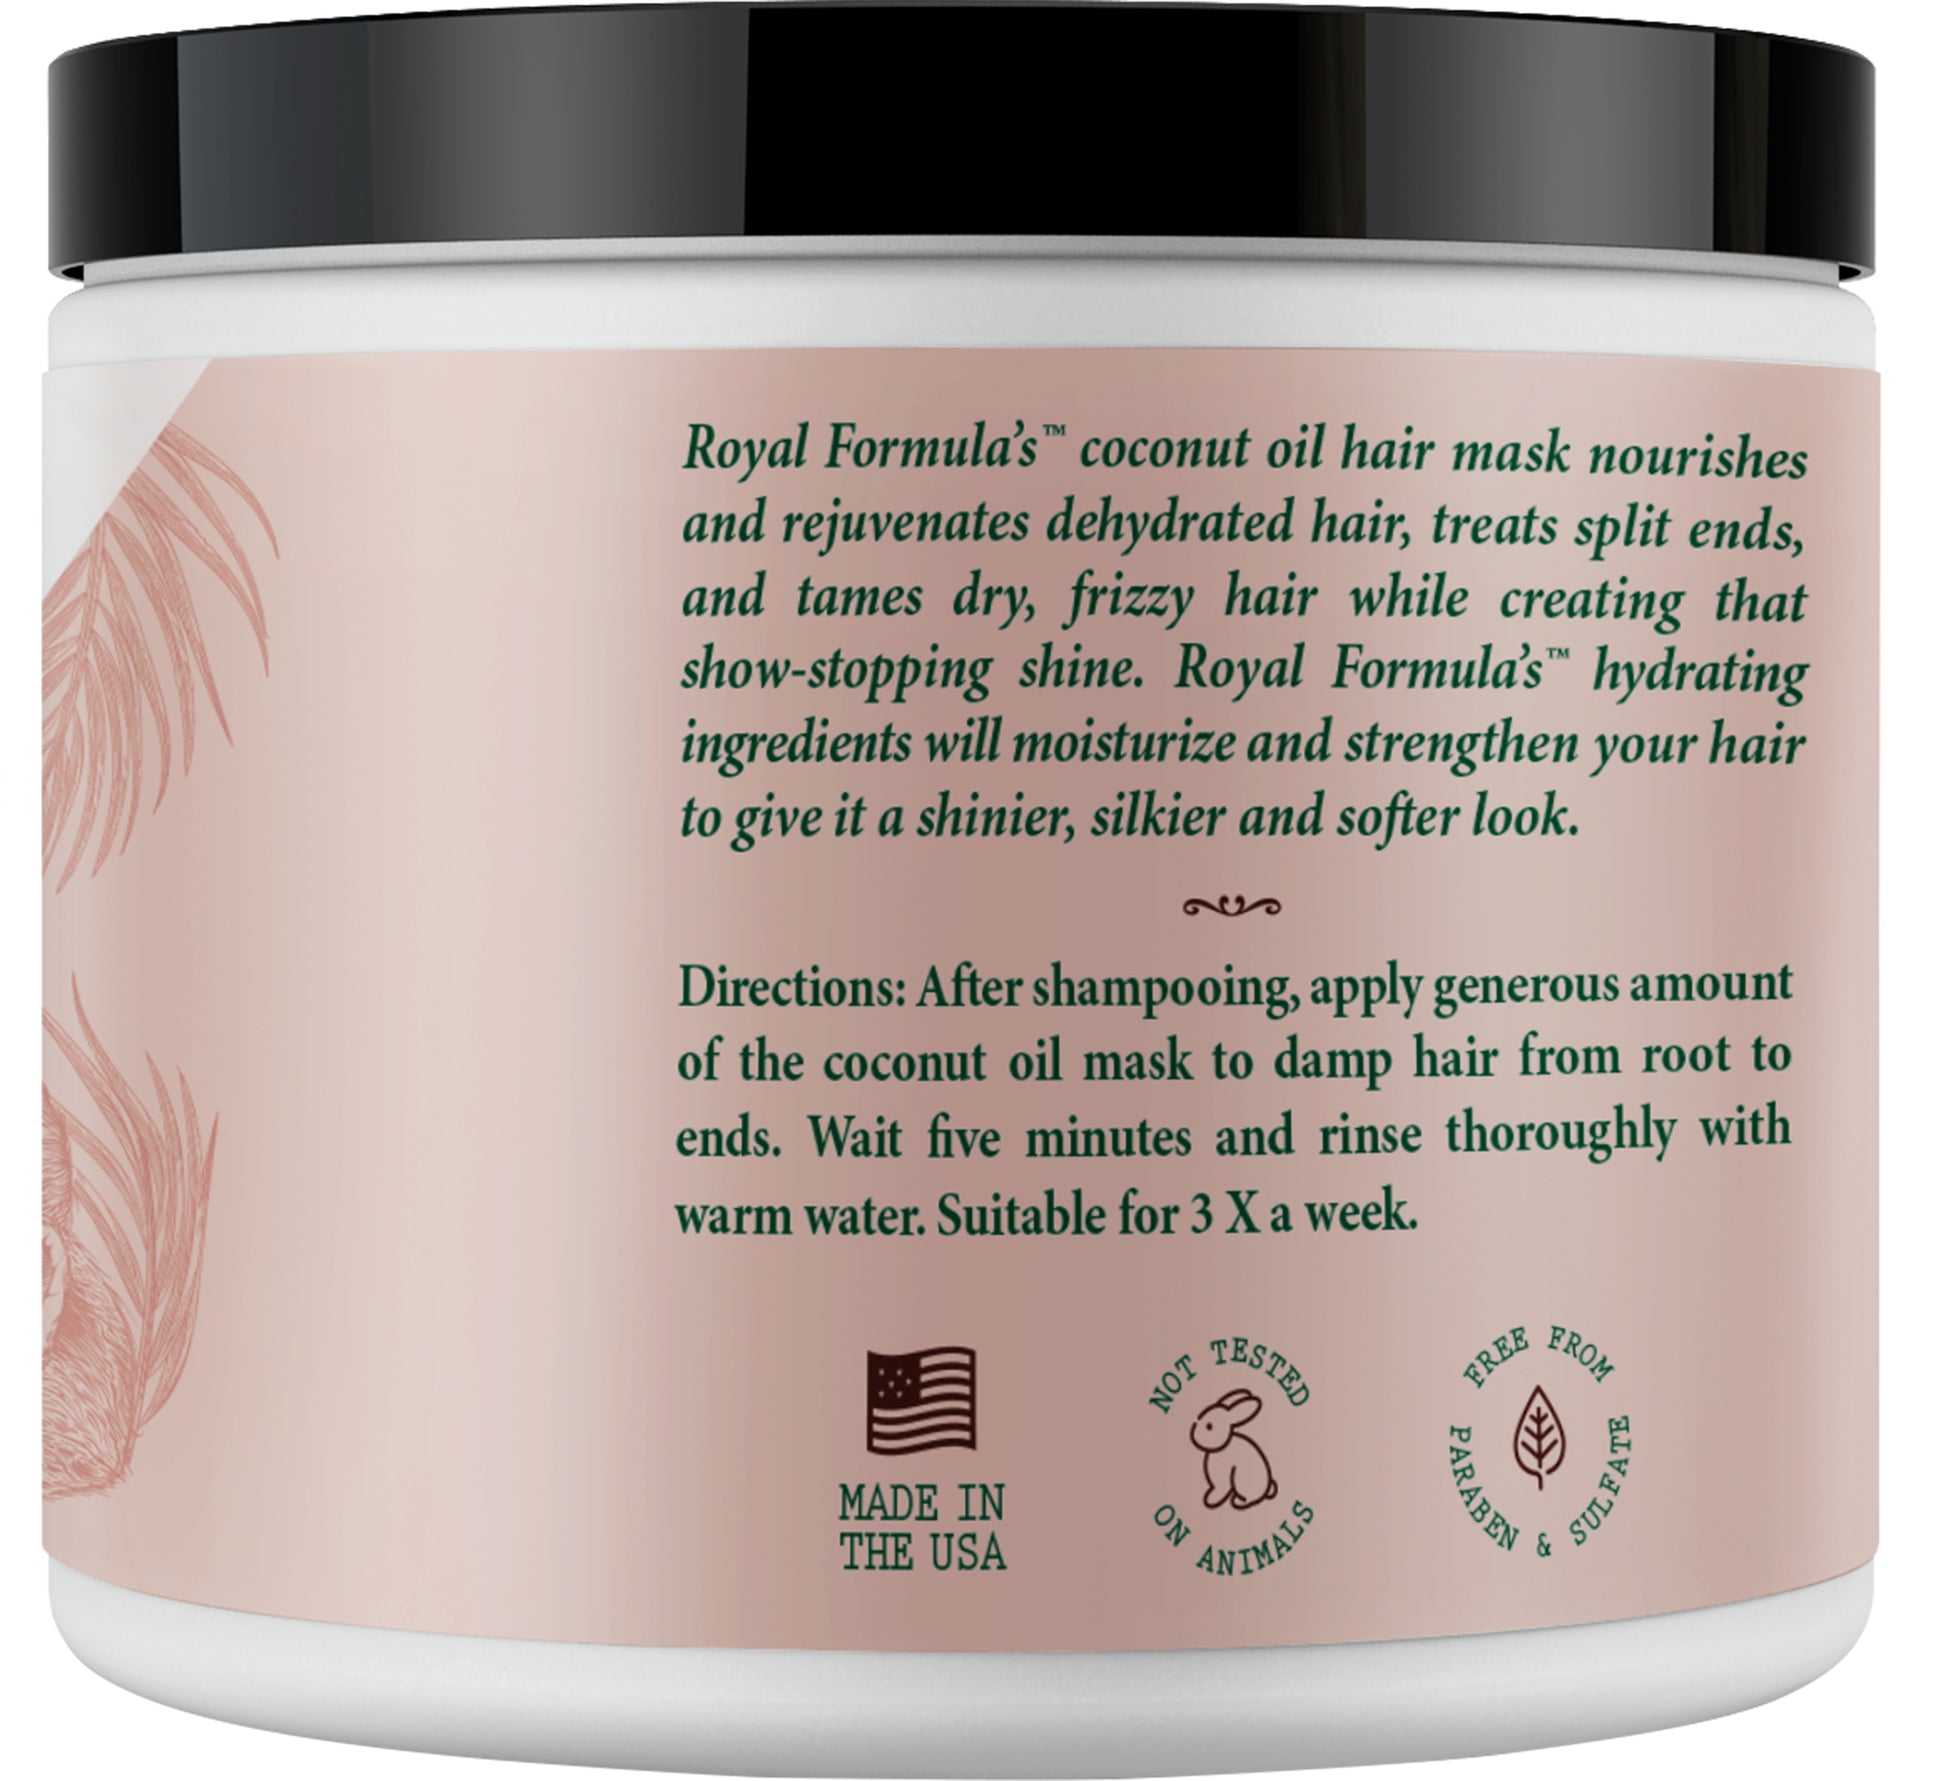 How to Use Royal Formula Coconut Oil Hair Mask Deep Conditioning Treatment 